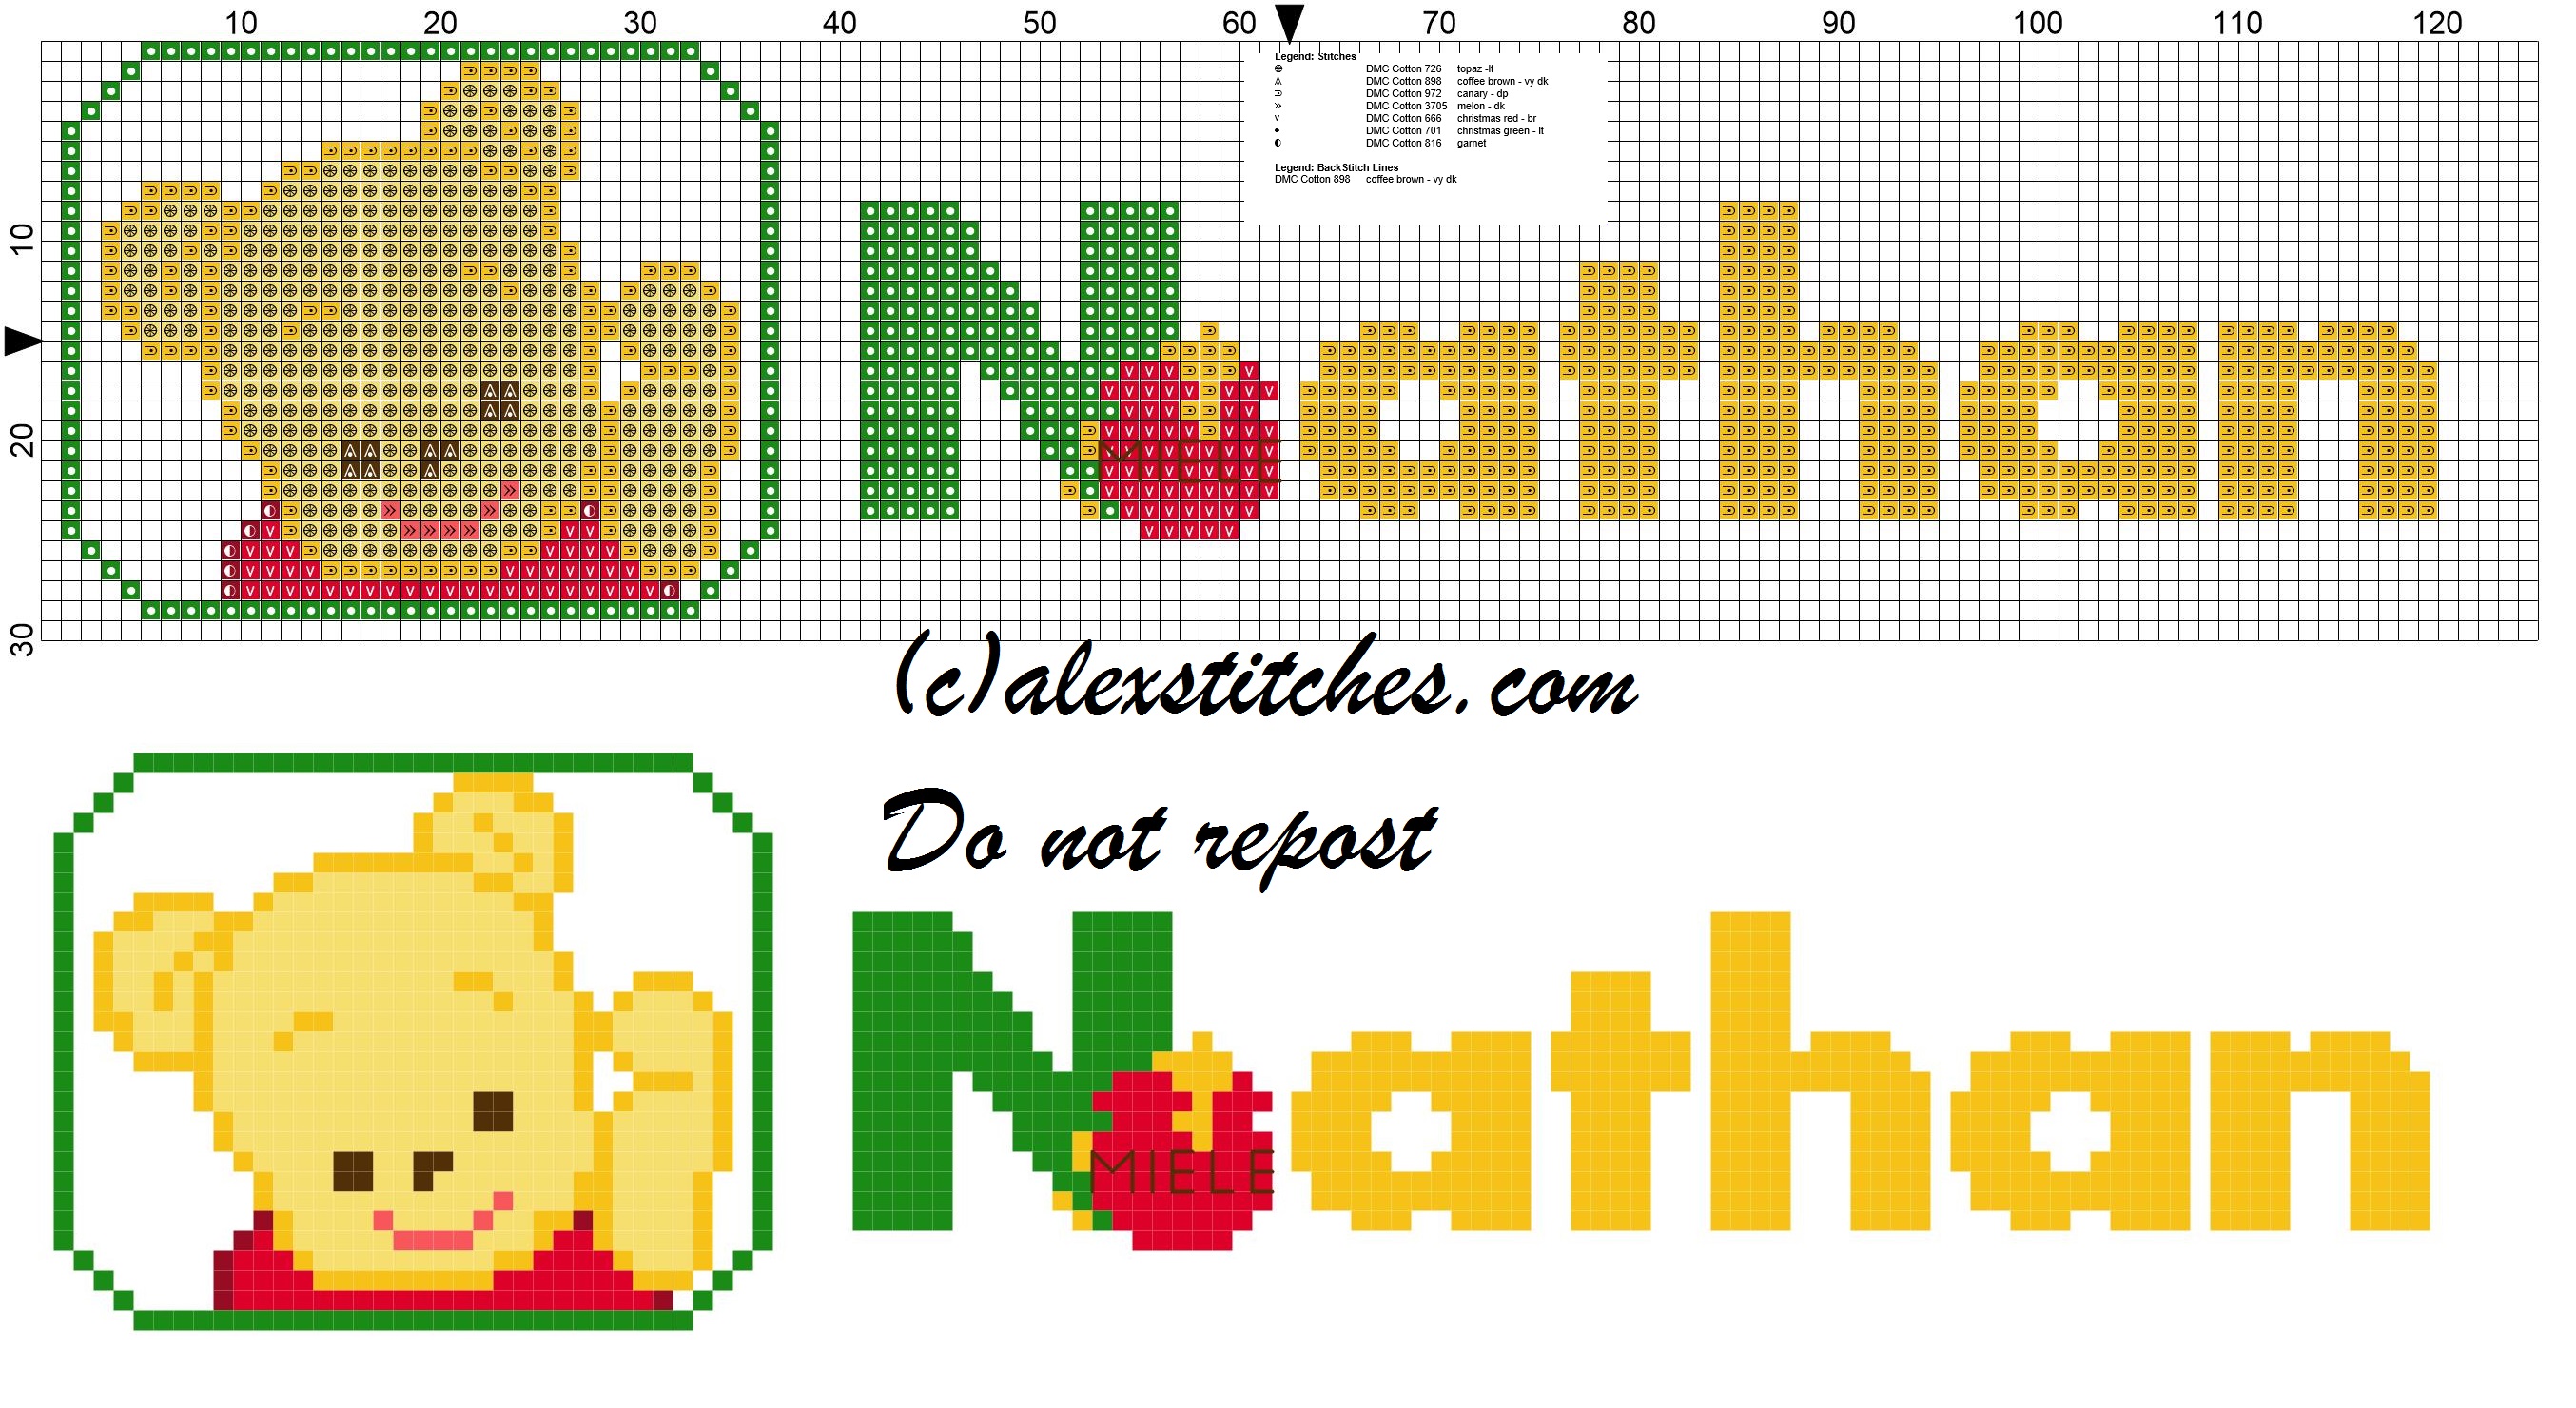 Nathan name with Baby winnie the pooh free cross stitches pattern